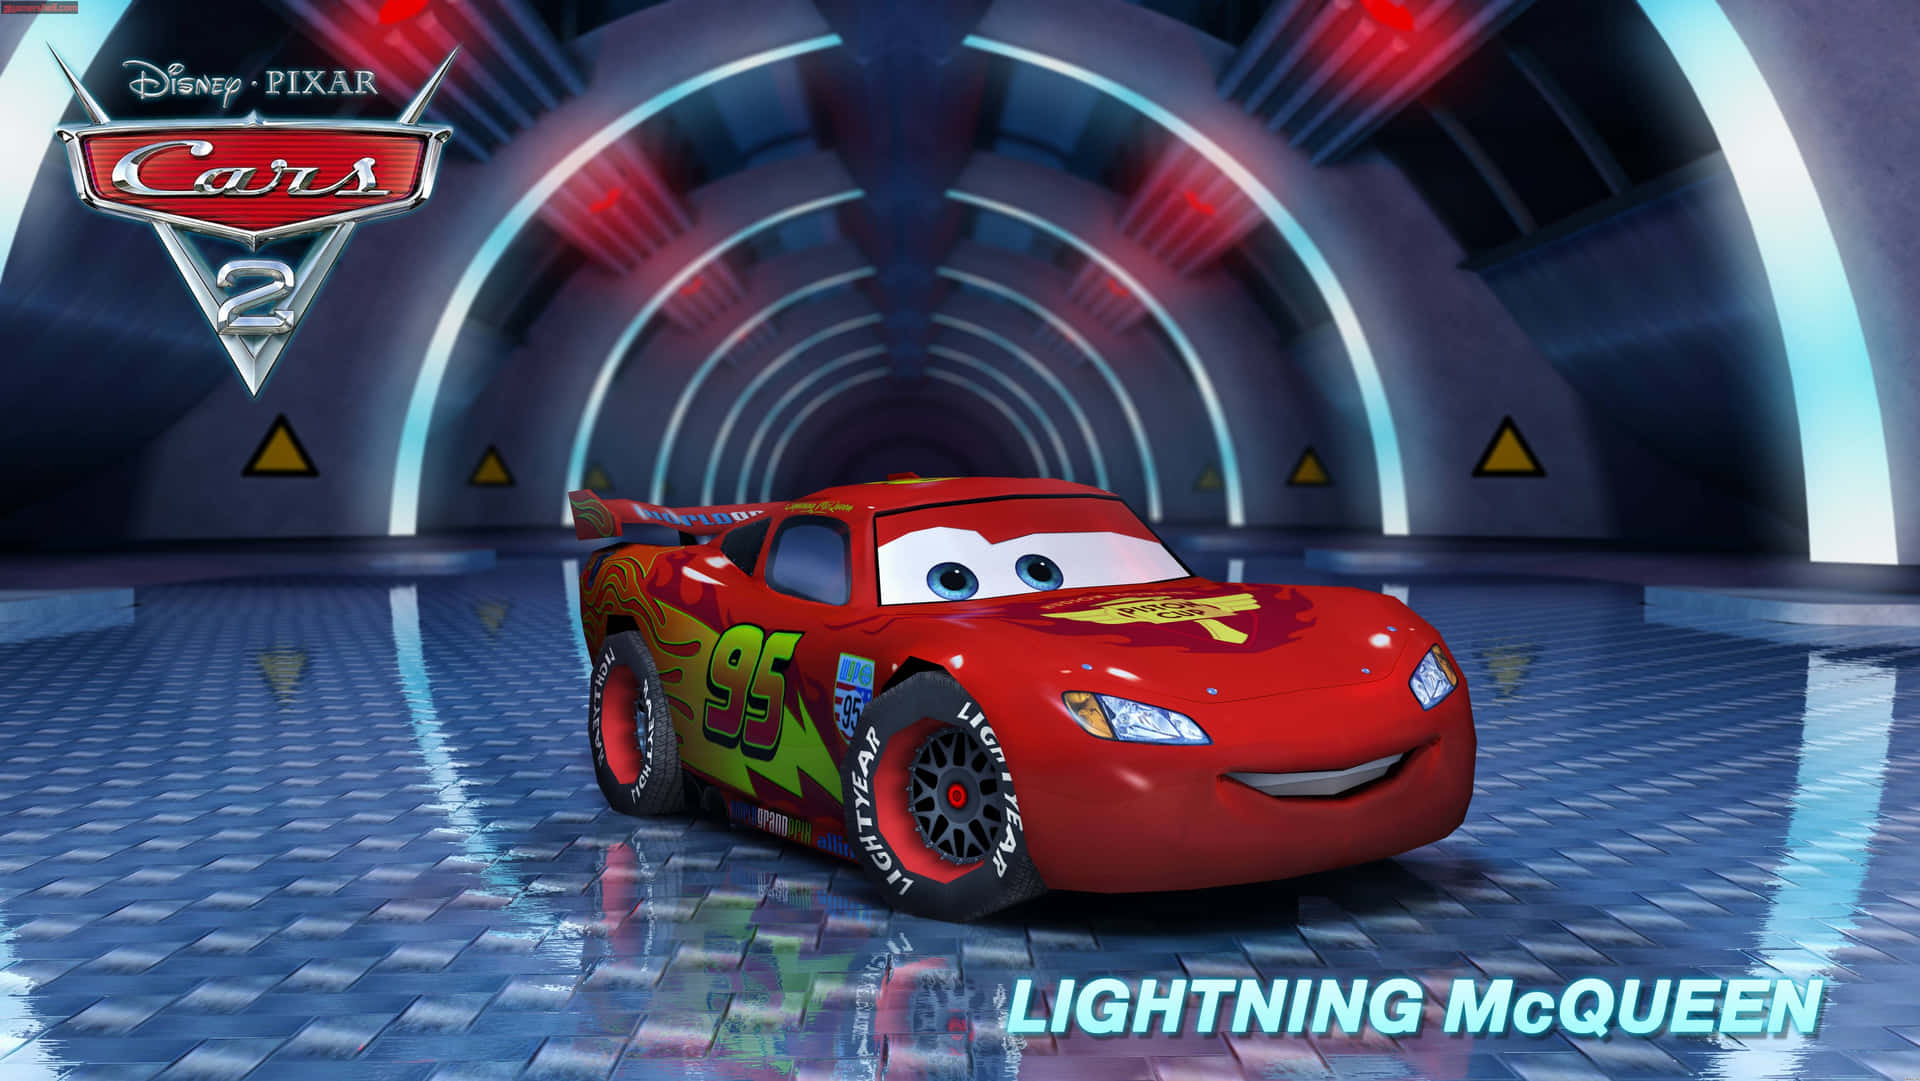 Lighting McQueen and the gang ready for another wild ride